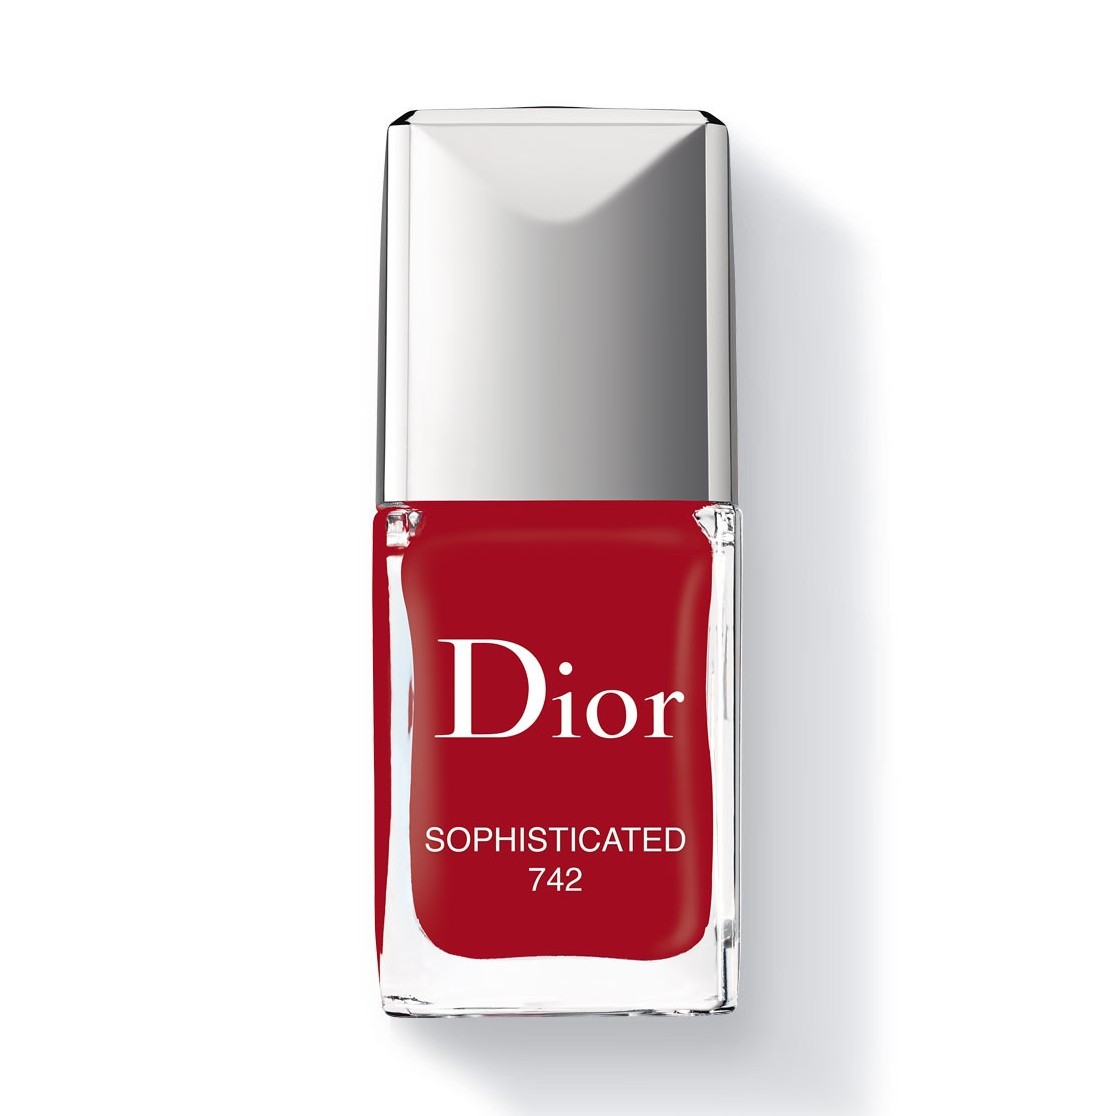 Dior - 742 Sophisticated